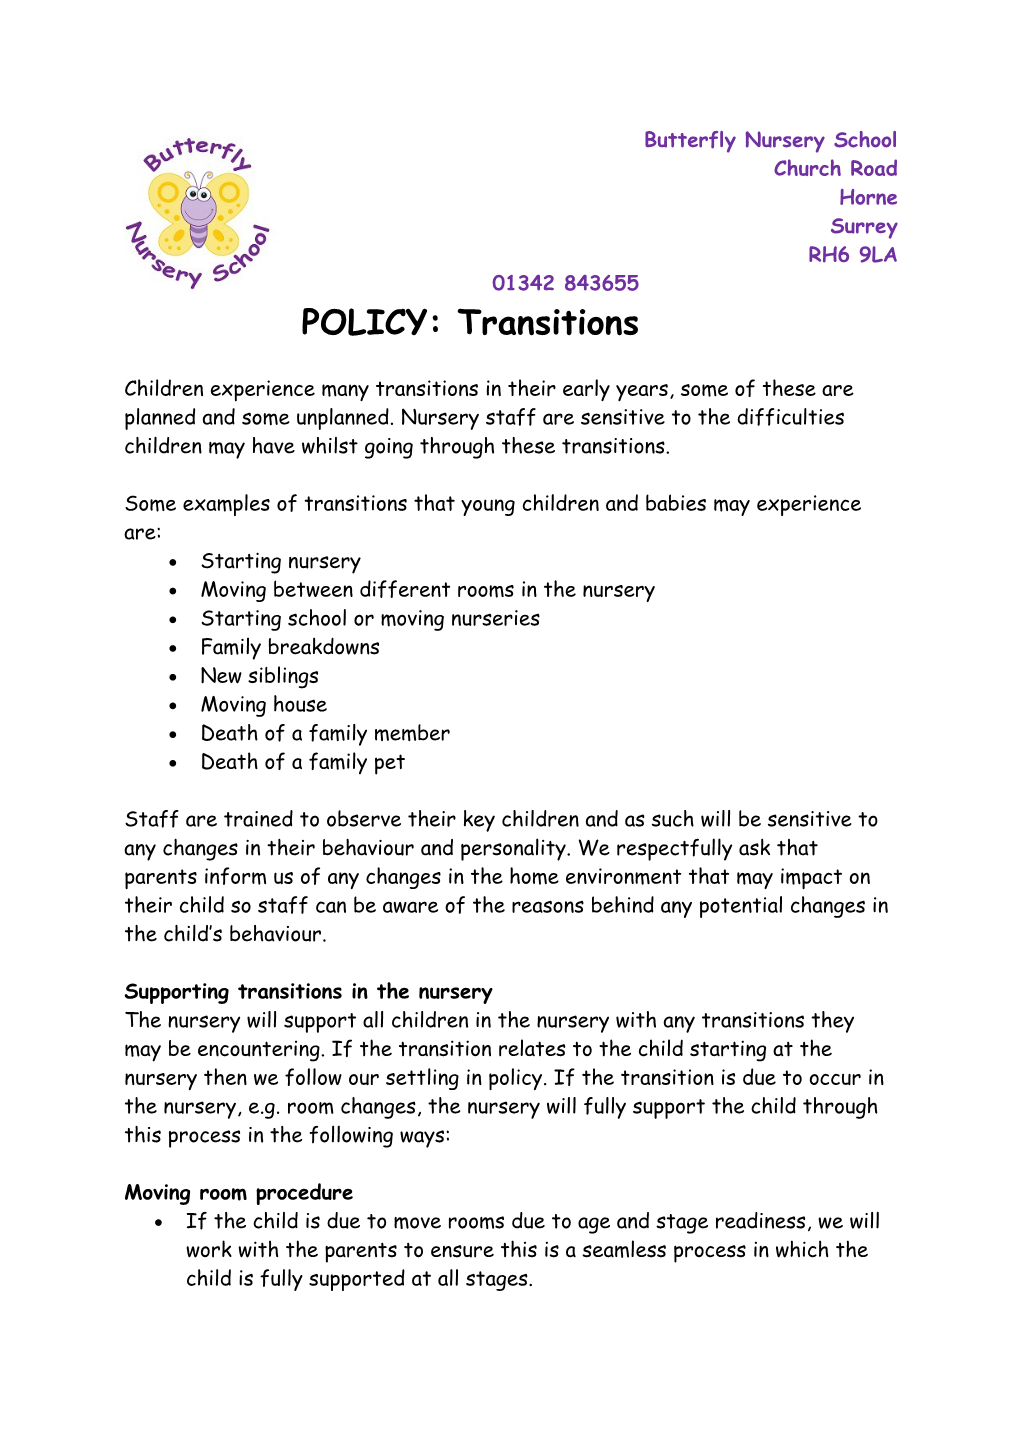 POLICY:Transitions